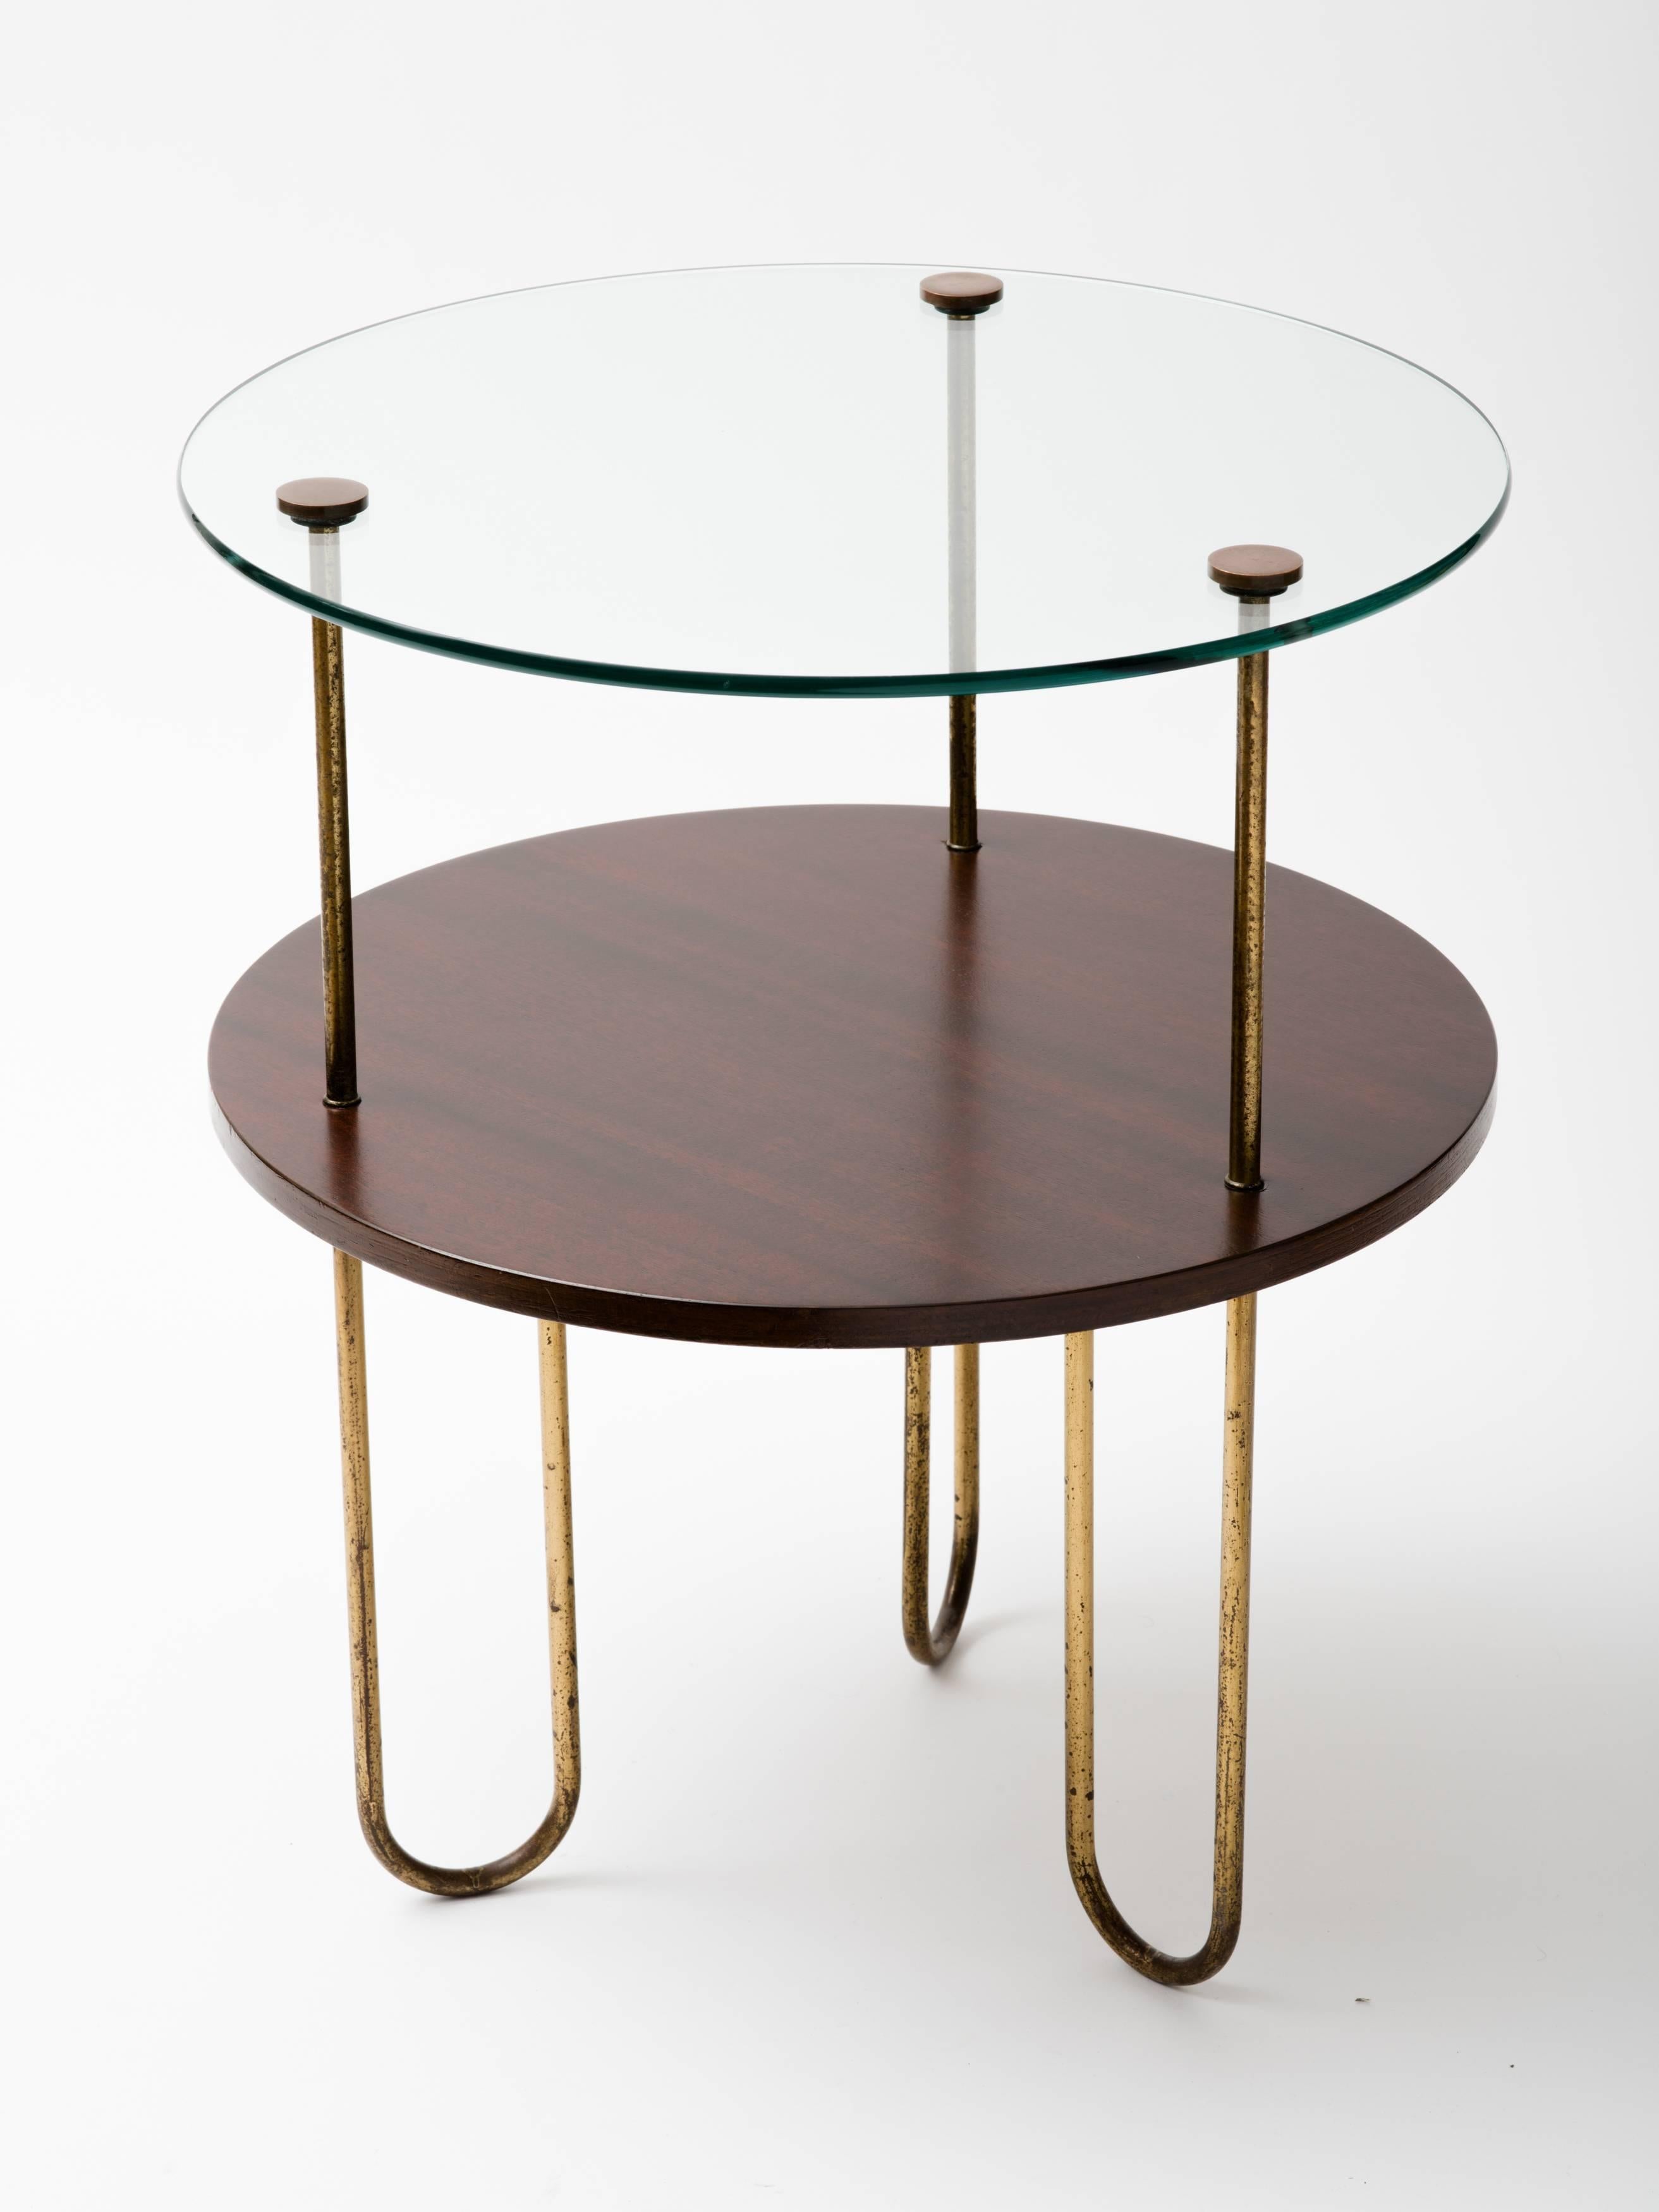 Original Art Deco circular walnut gueridon with curved hairpin legs. Copper hardware attaches glass top to table. Metal legs have distressed patina, which gives table authenticity.